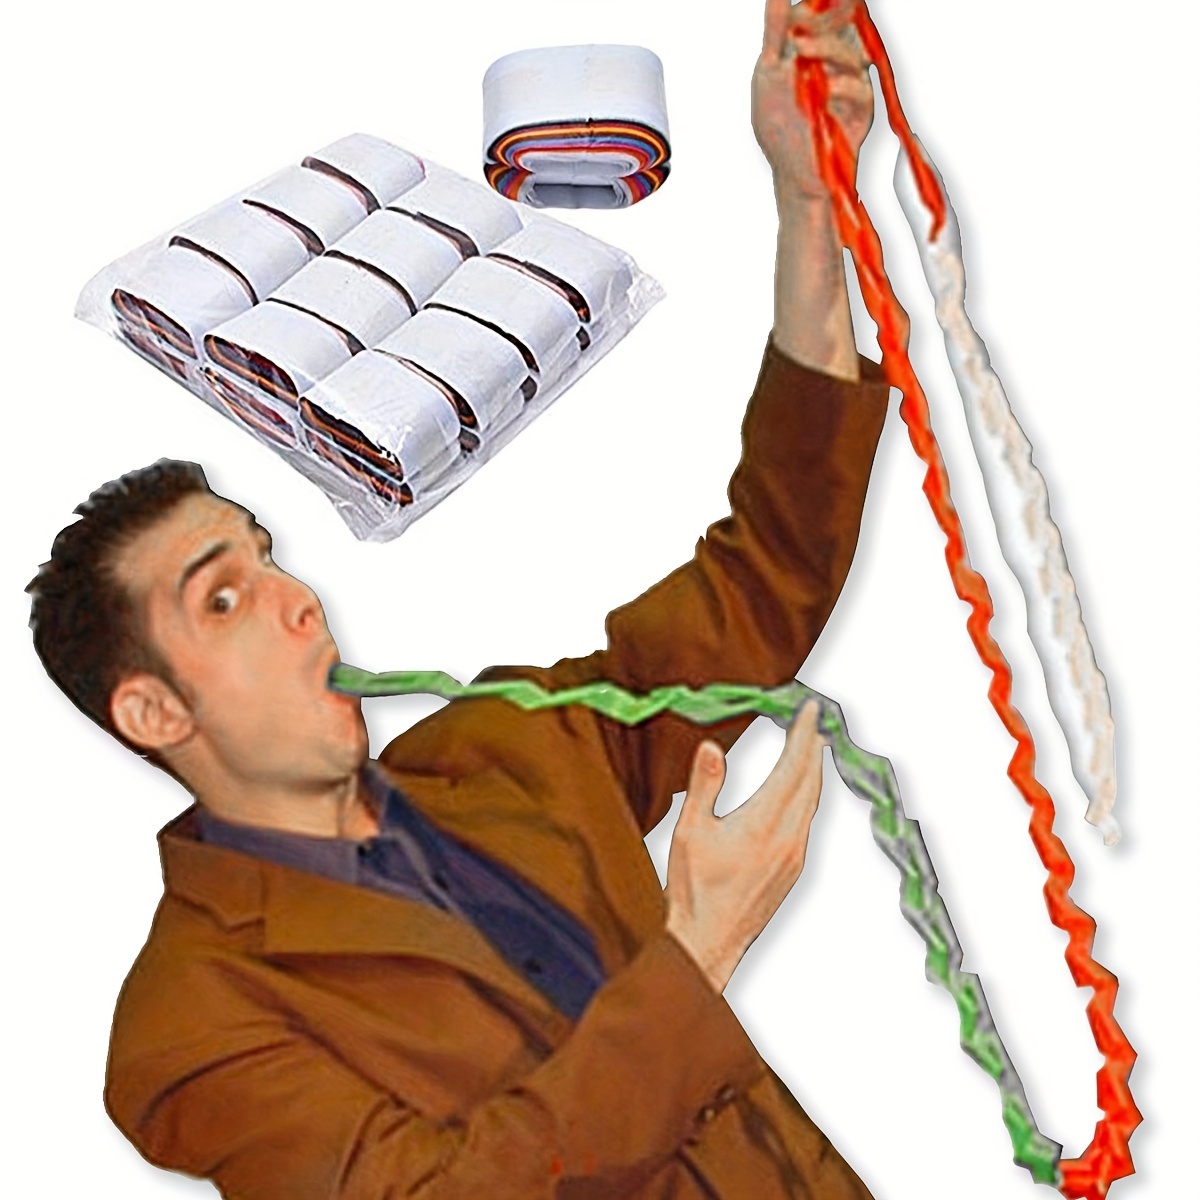 

12-piece Colorful Magic Mouth Coils - 25ft Extendable Paper Tricks For Stage & Street Performances, Easy To Learn Accessories